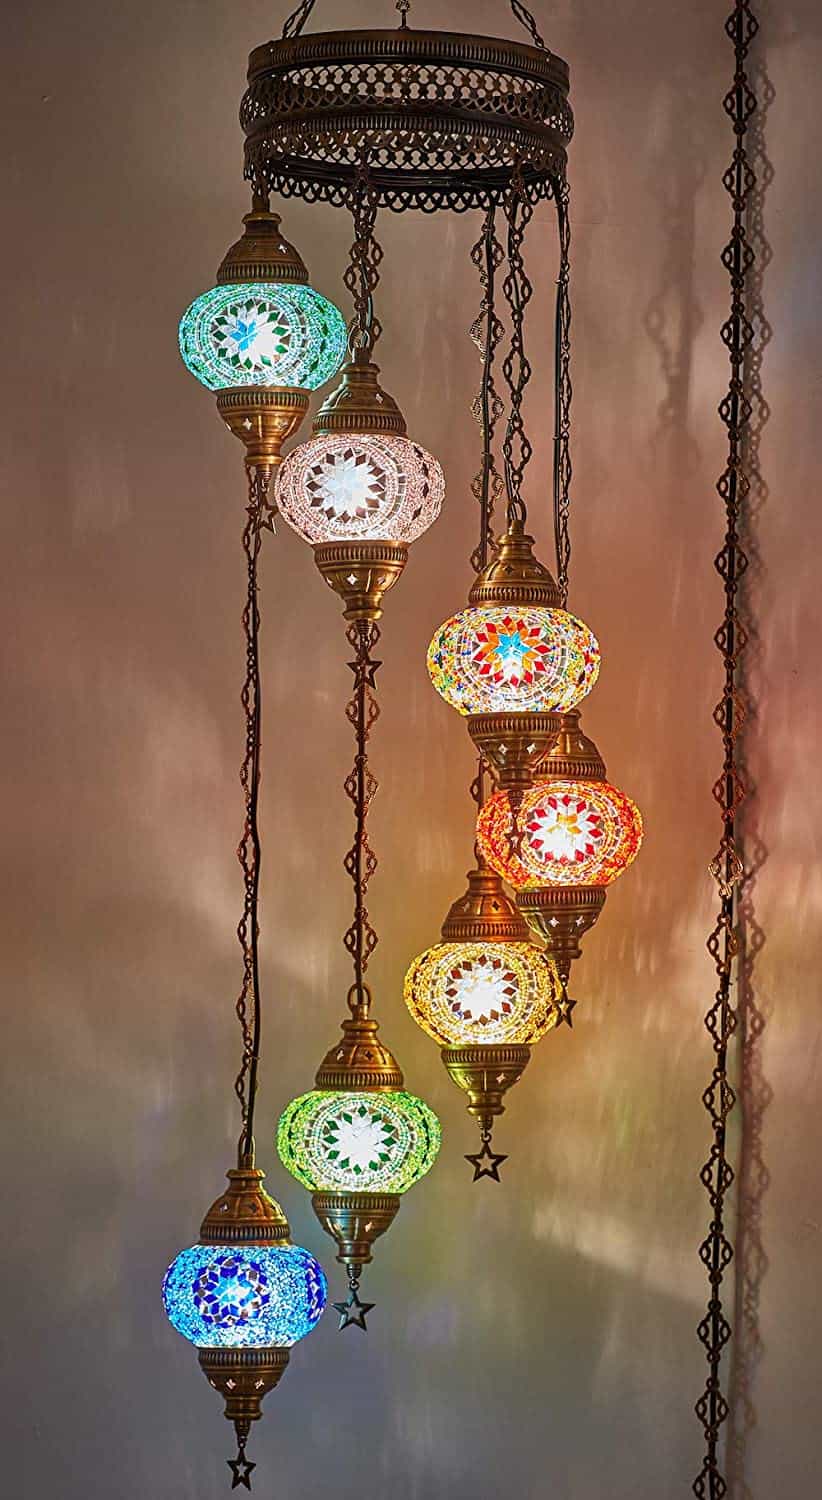 CopperBull (Choose from 12 Designs) Turkish Moroccan Mosaic Glass Chandelier Lights Hanging Ceiling Lamps-a